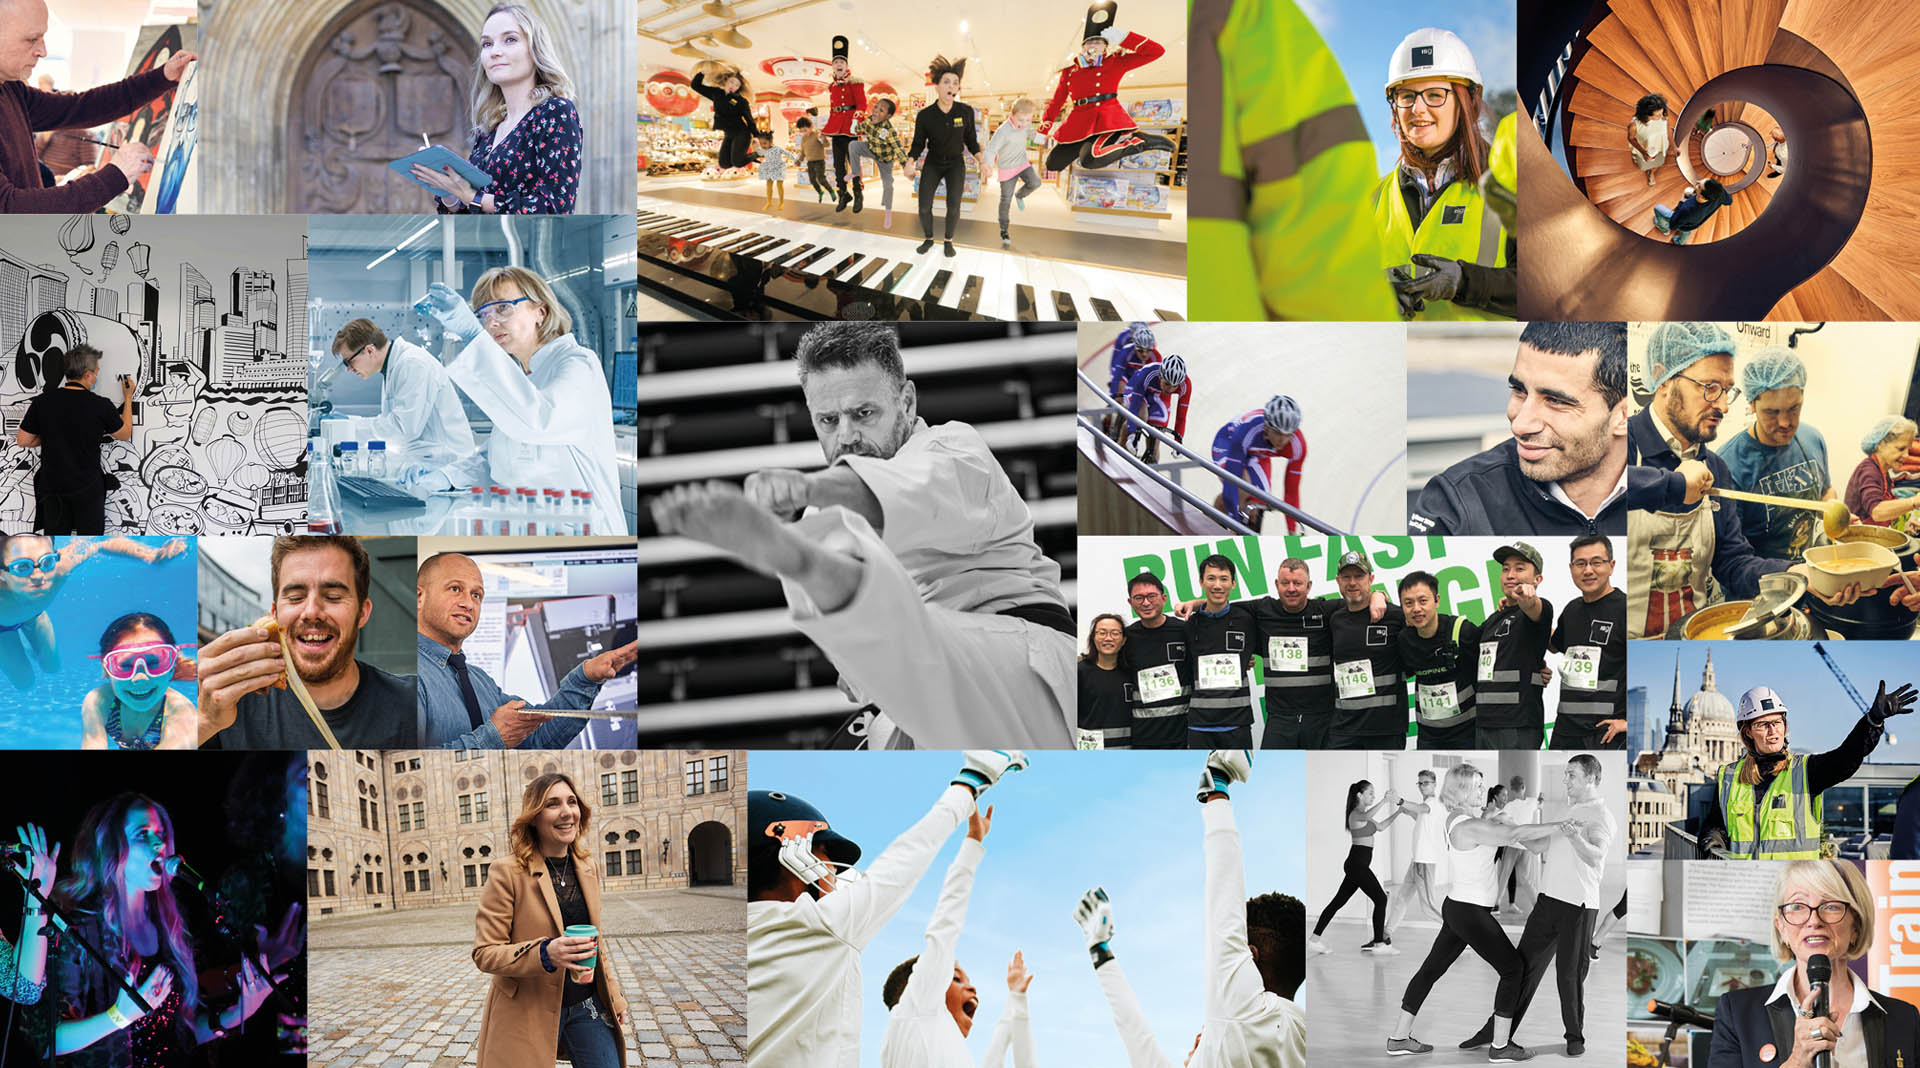 ISG Values and Culture picture montage